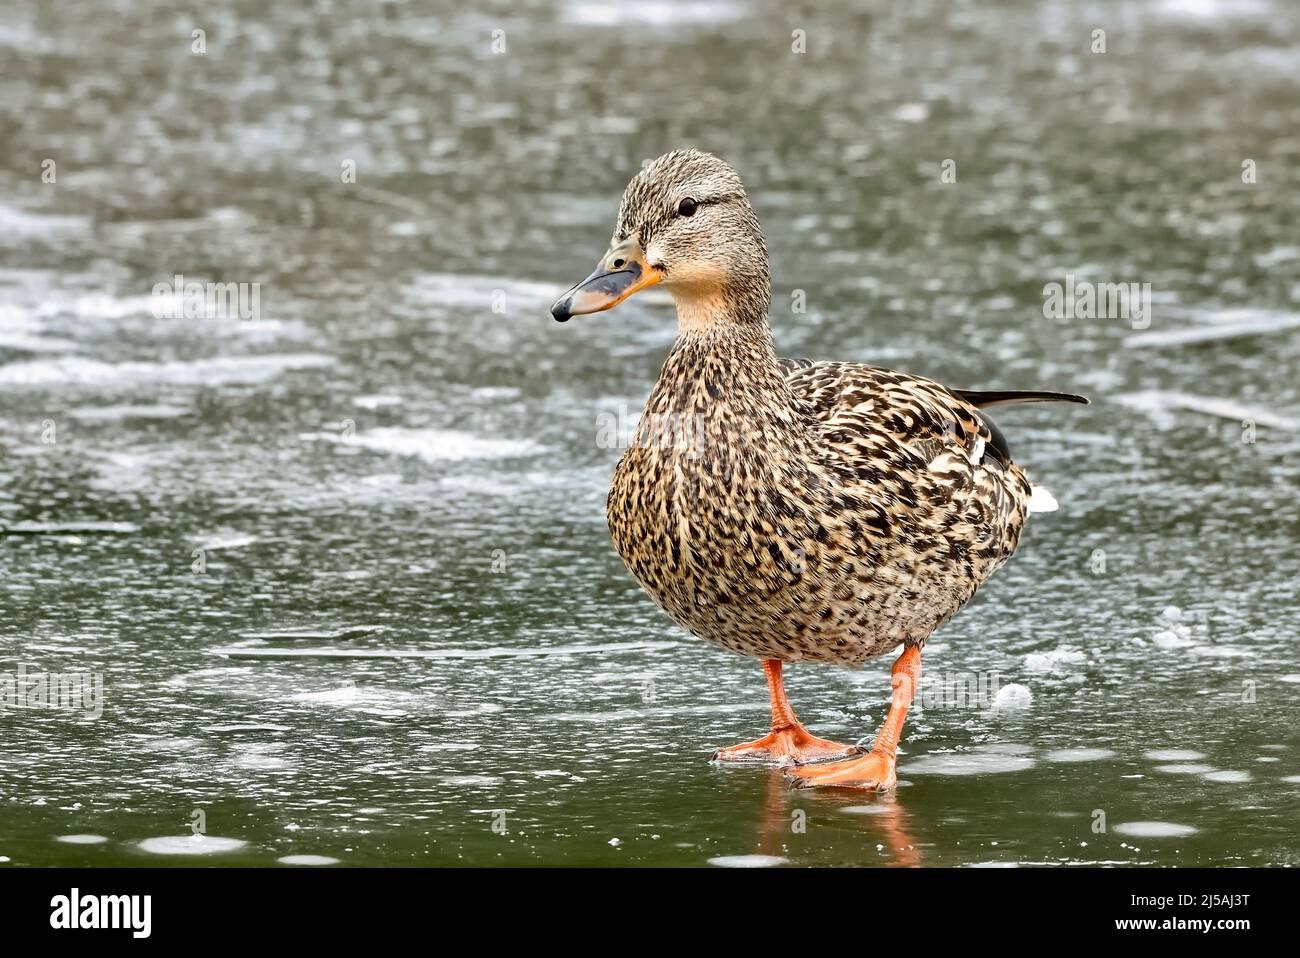 A front view of a female Mallard duck Anas platyrhynchos, walking on the thin ice of a frozen pond in rural Alberta Canada Stock Photo